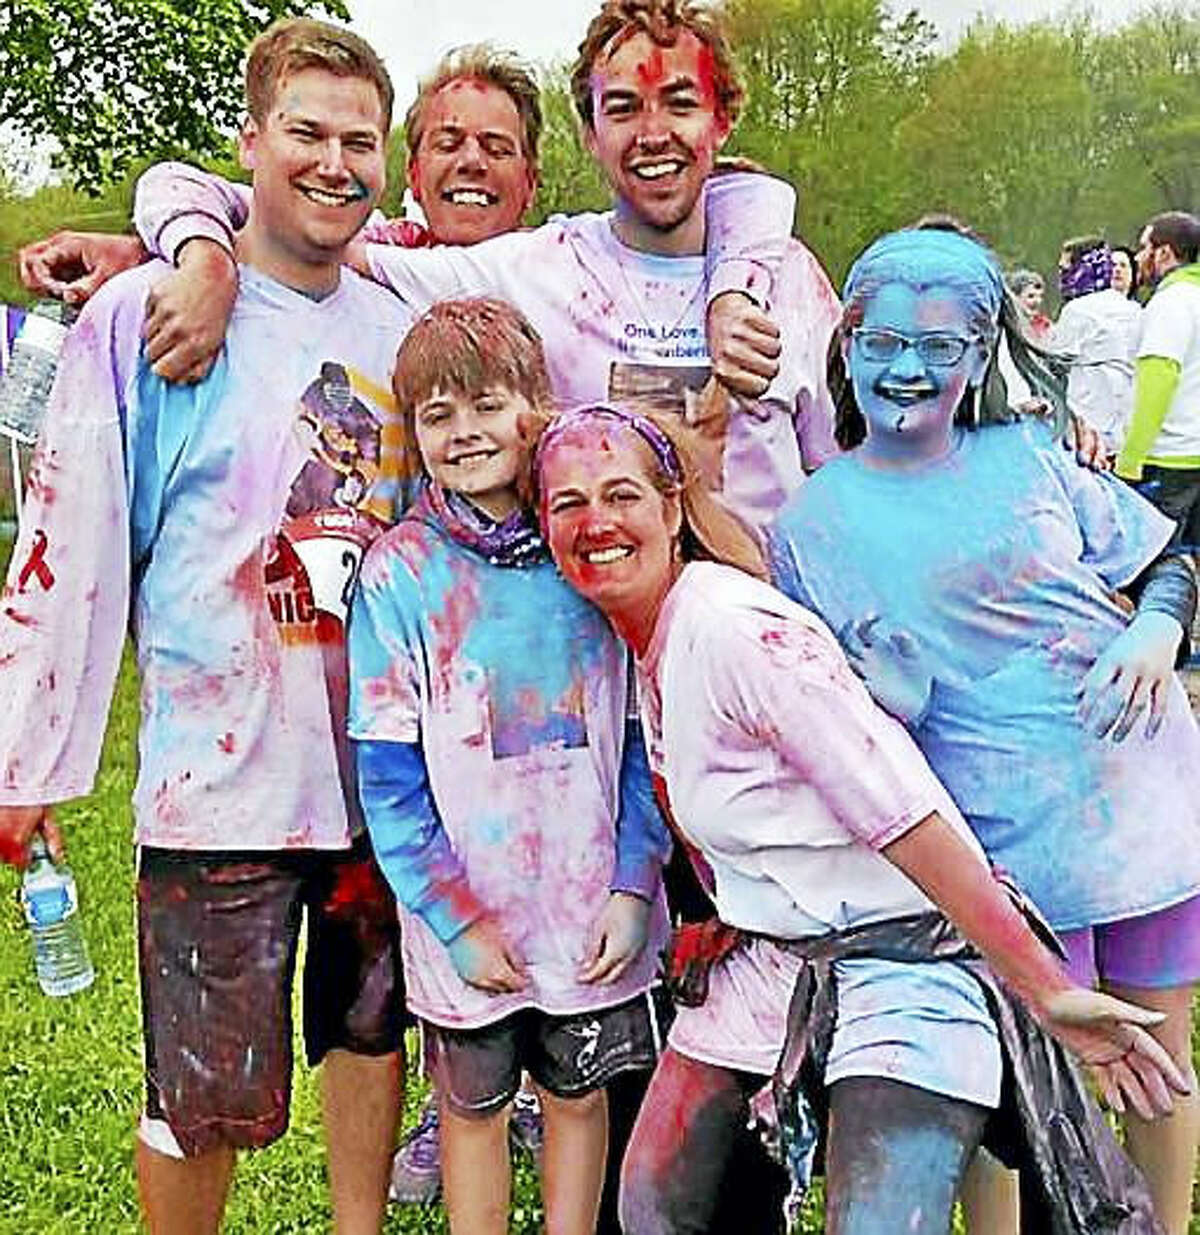 Runners and walkers were covered in color, from head to toe, in the Lifelinx/DAY 5K Nick Kruczek Color Run/Walk. Front row from left are Teagan Kruczek, Sue Kruczek and Haley Kruczek and back row from left are Matt Swicki, Kyle Kruczek and Sean Langrieger.